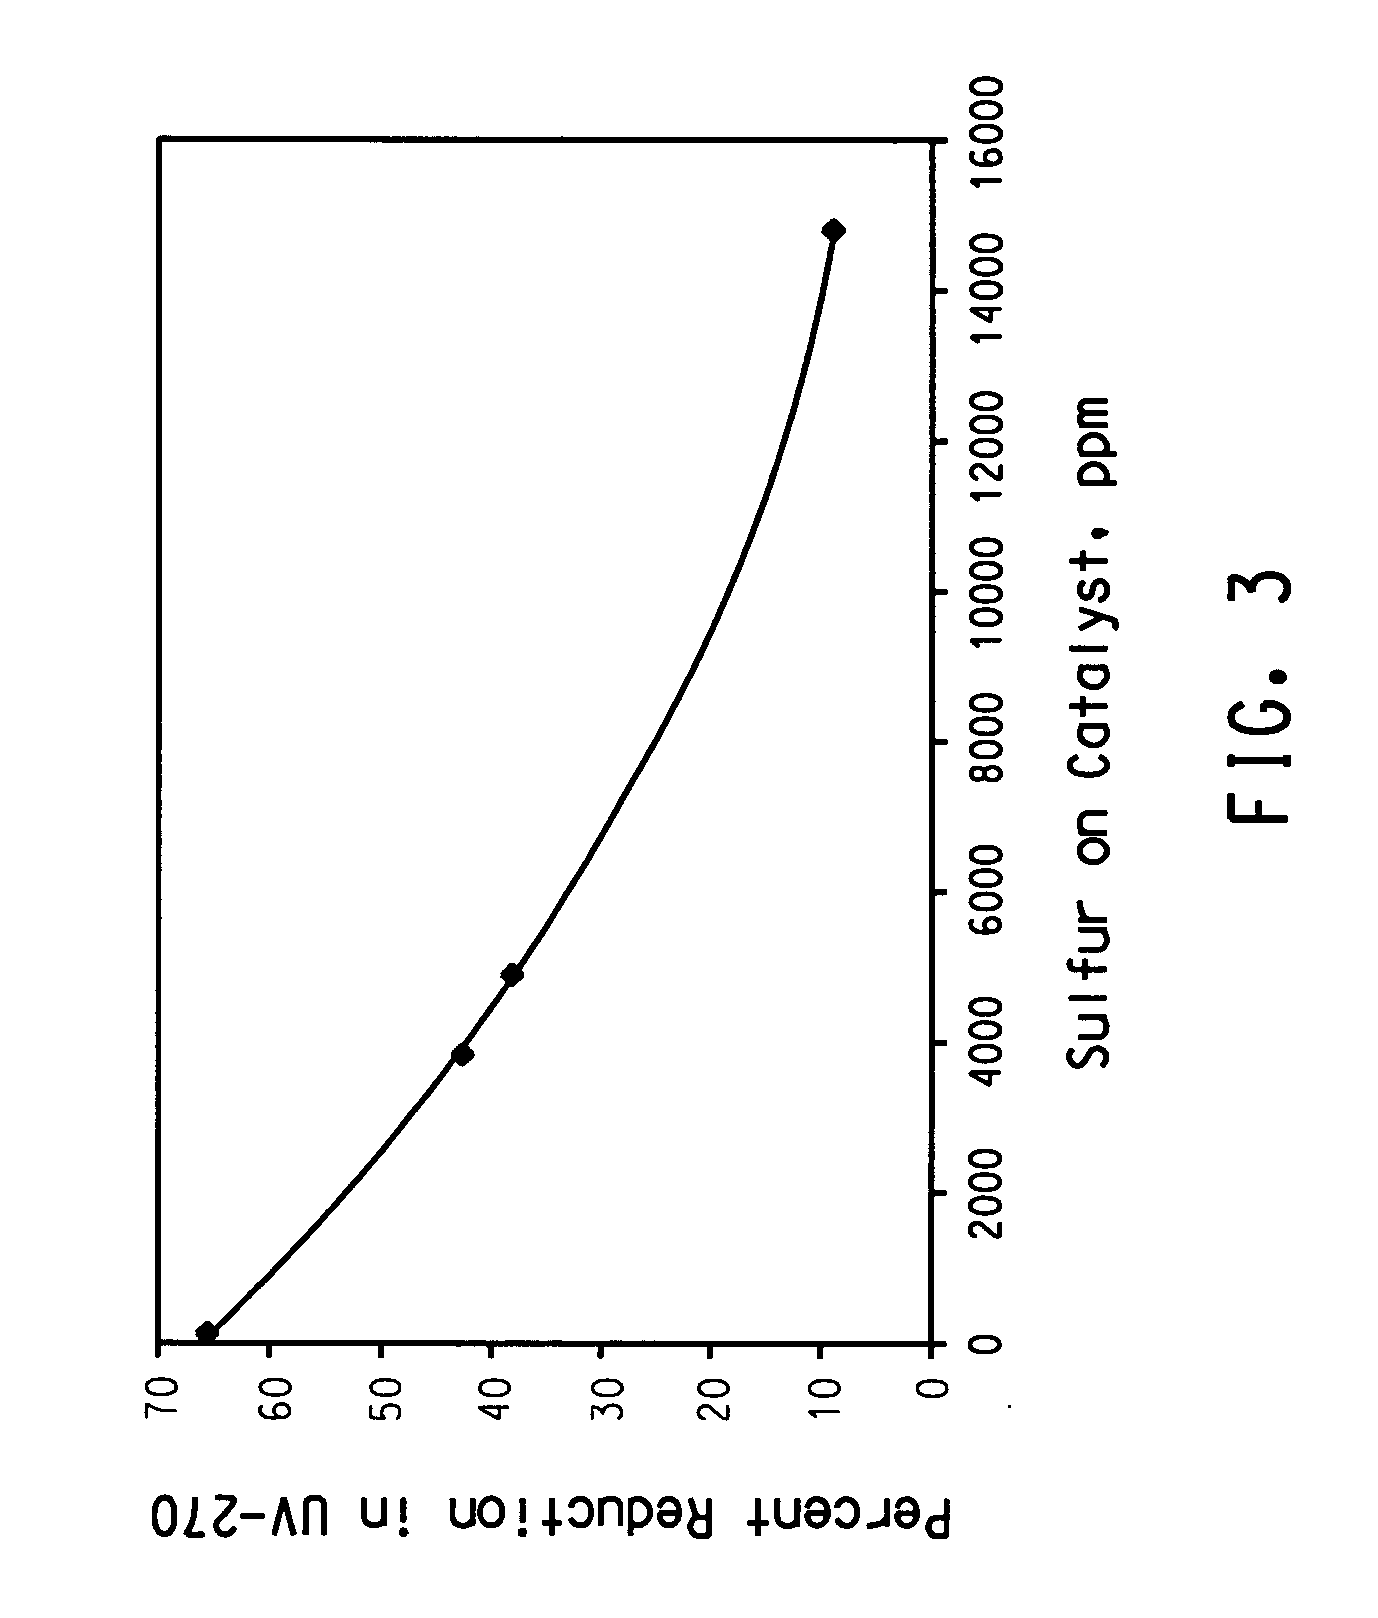 Method to extend the utilization of a catalyst in a multistage reactor system